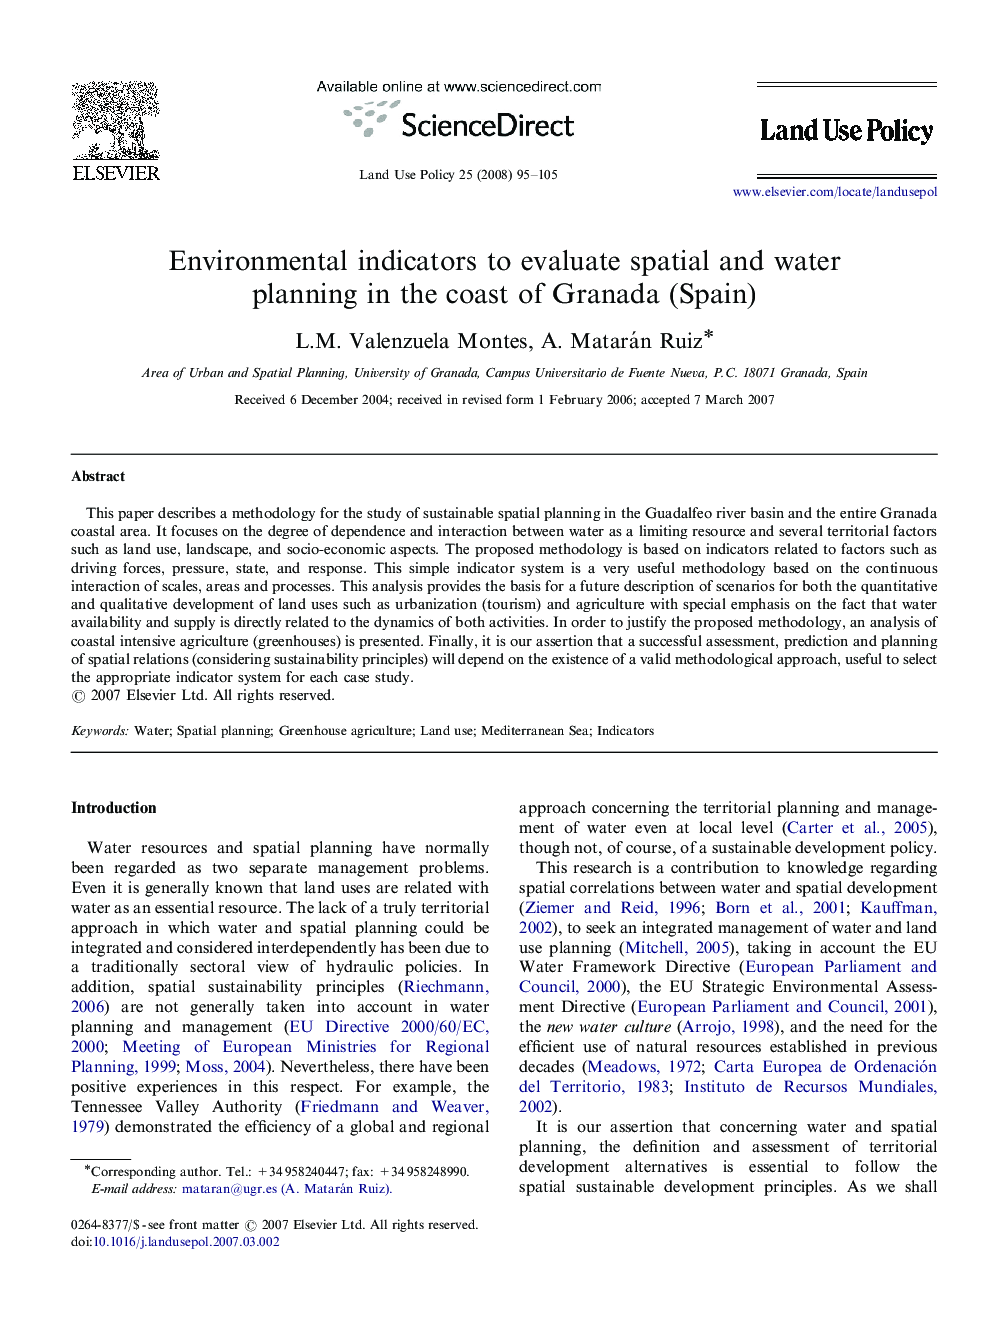 Environmental indicators to evaluate spatial and water planning in the coast of Granada (Spain)